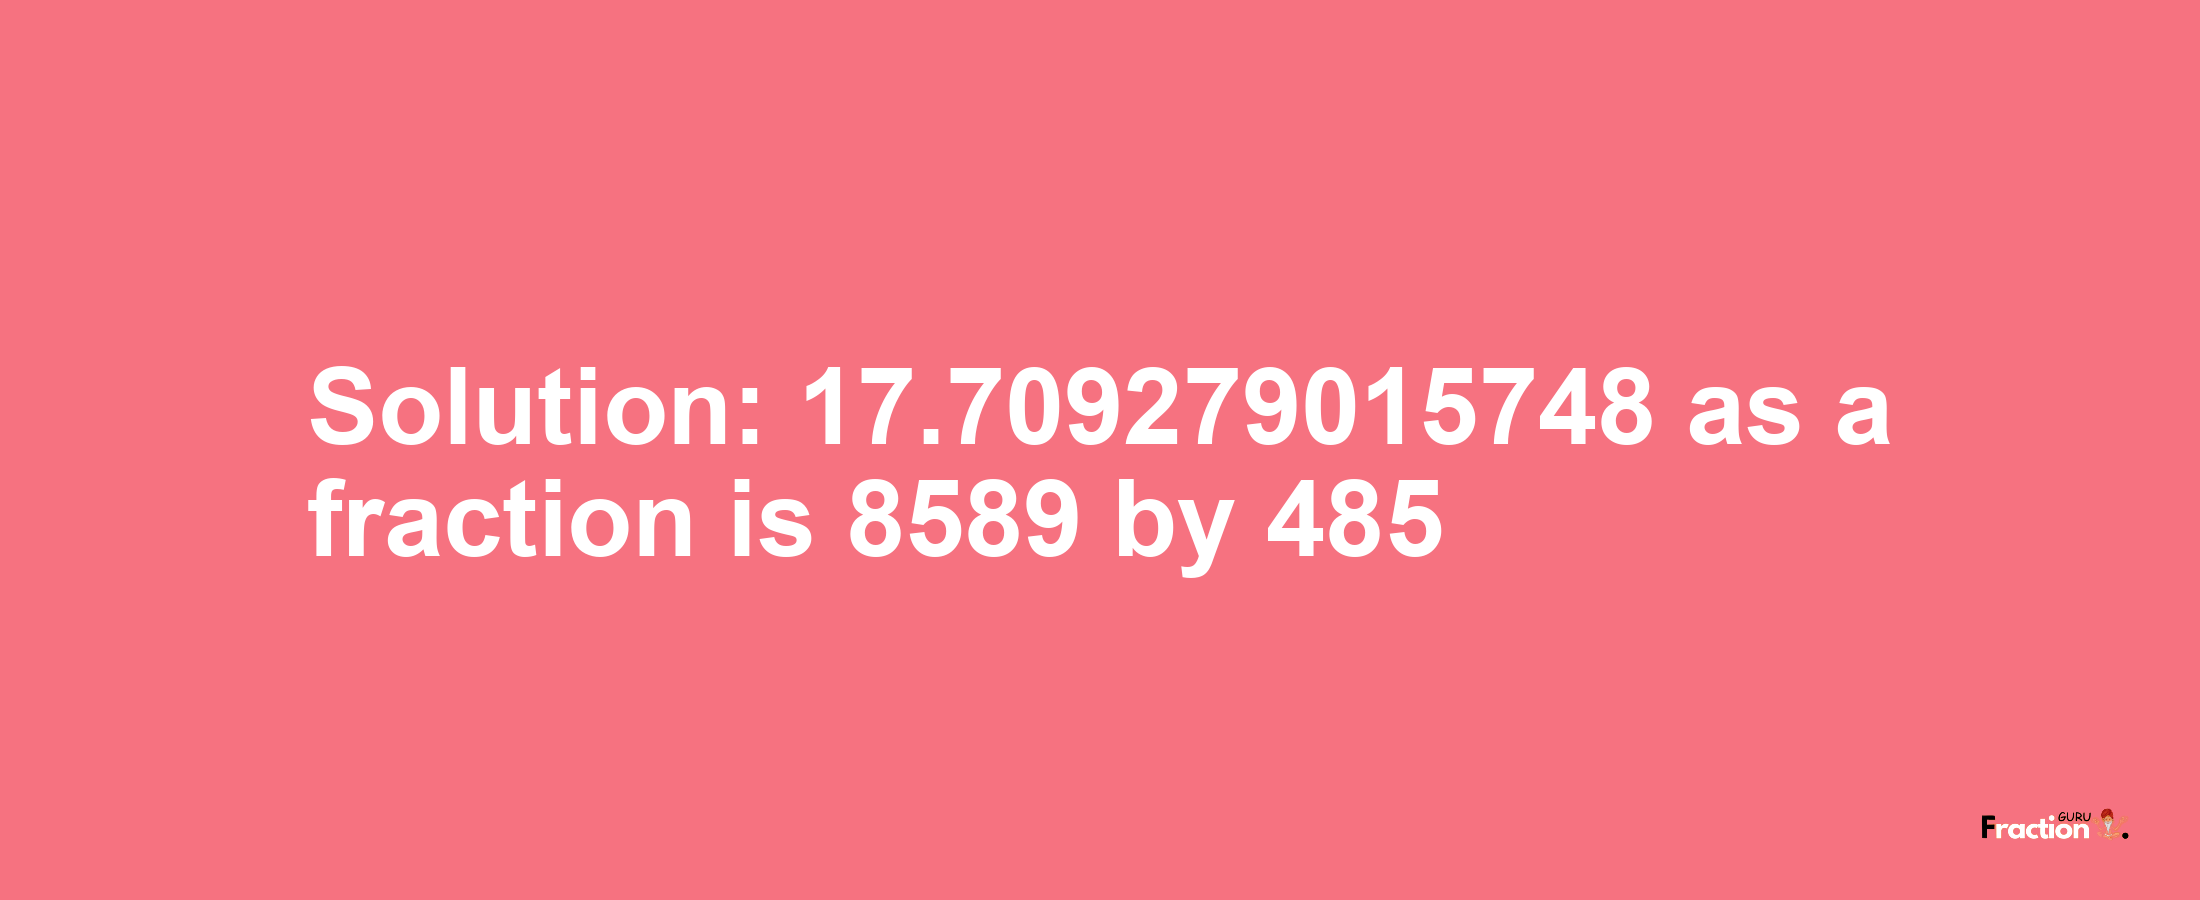 Solution:17.709279015748 as a fraction is 8589/485